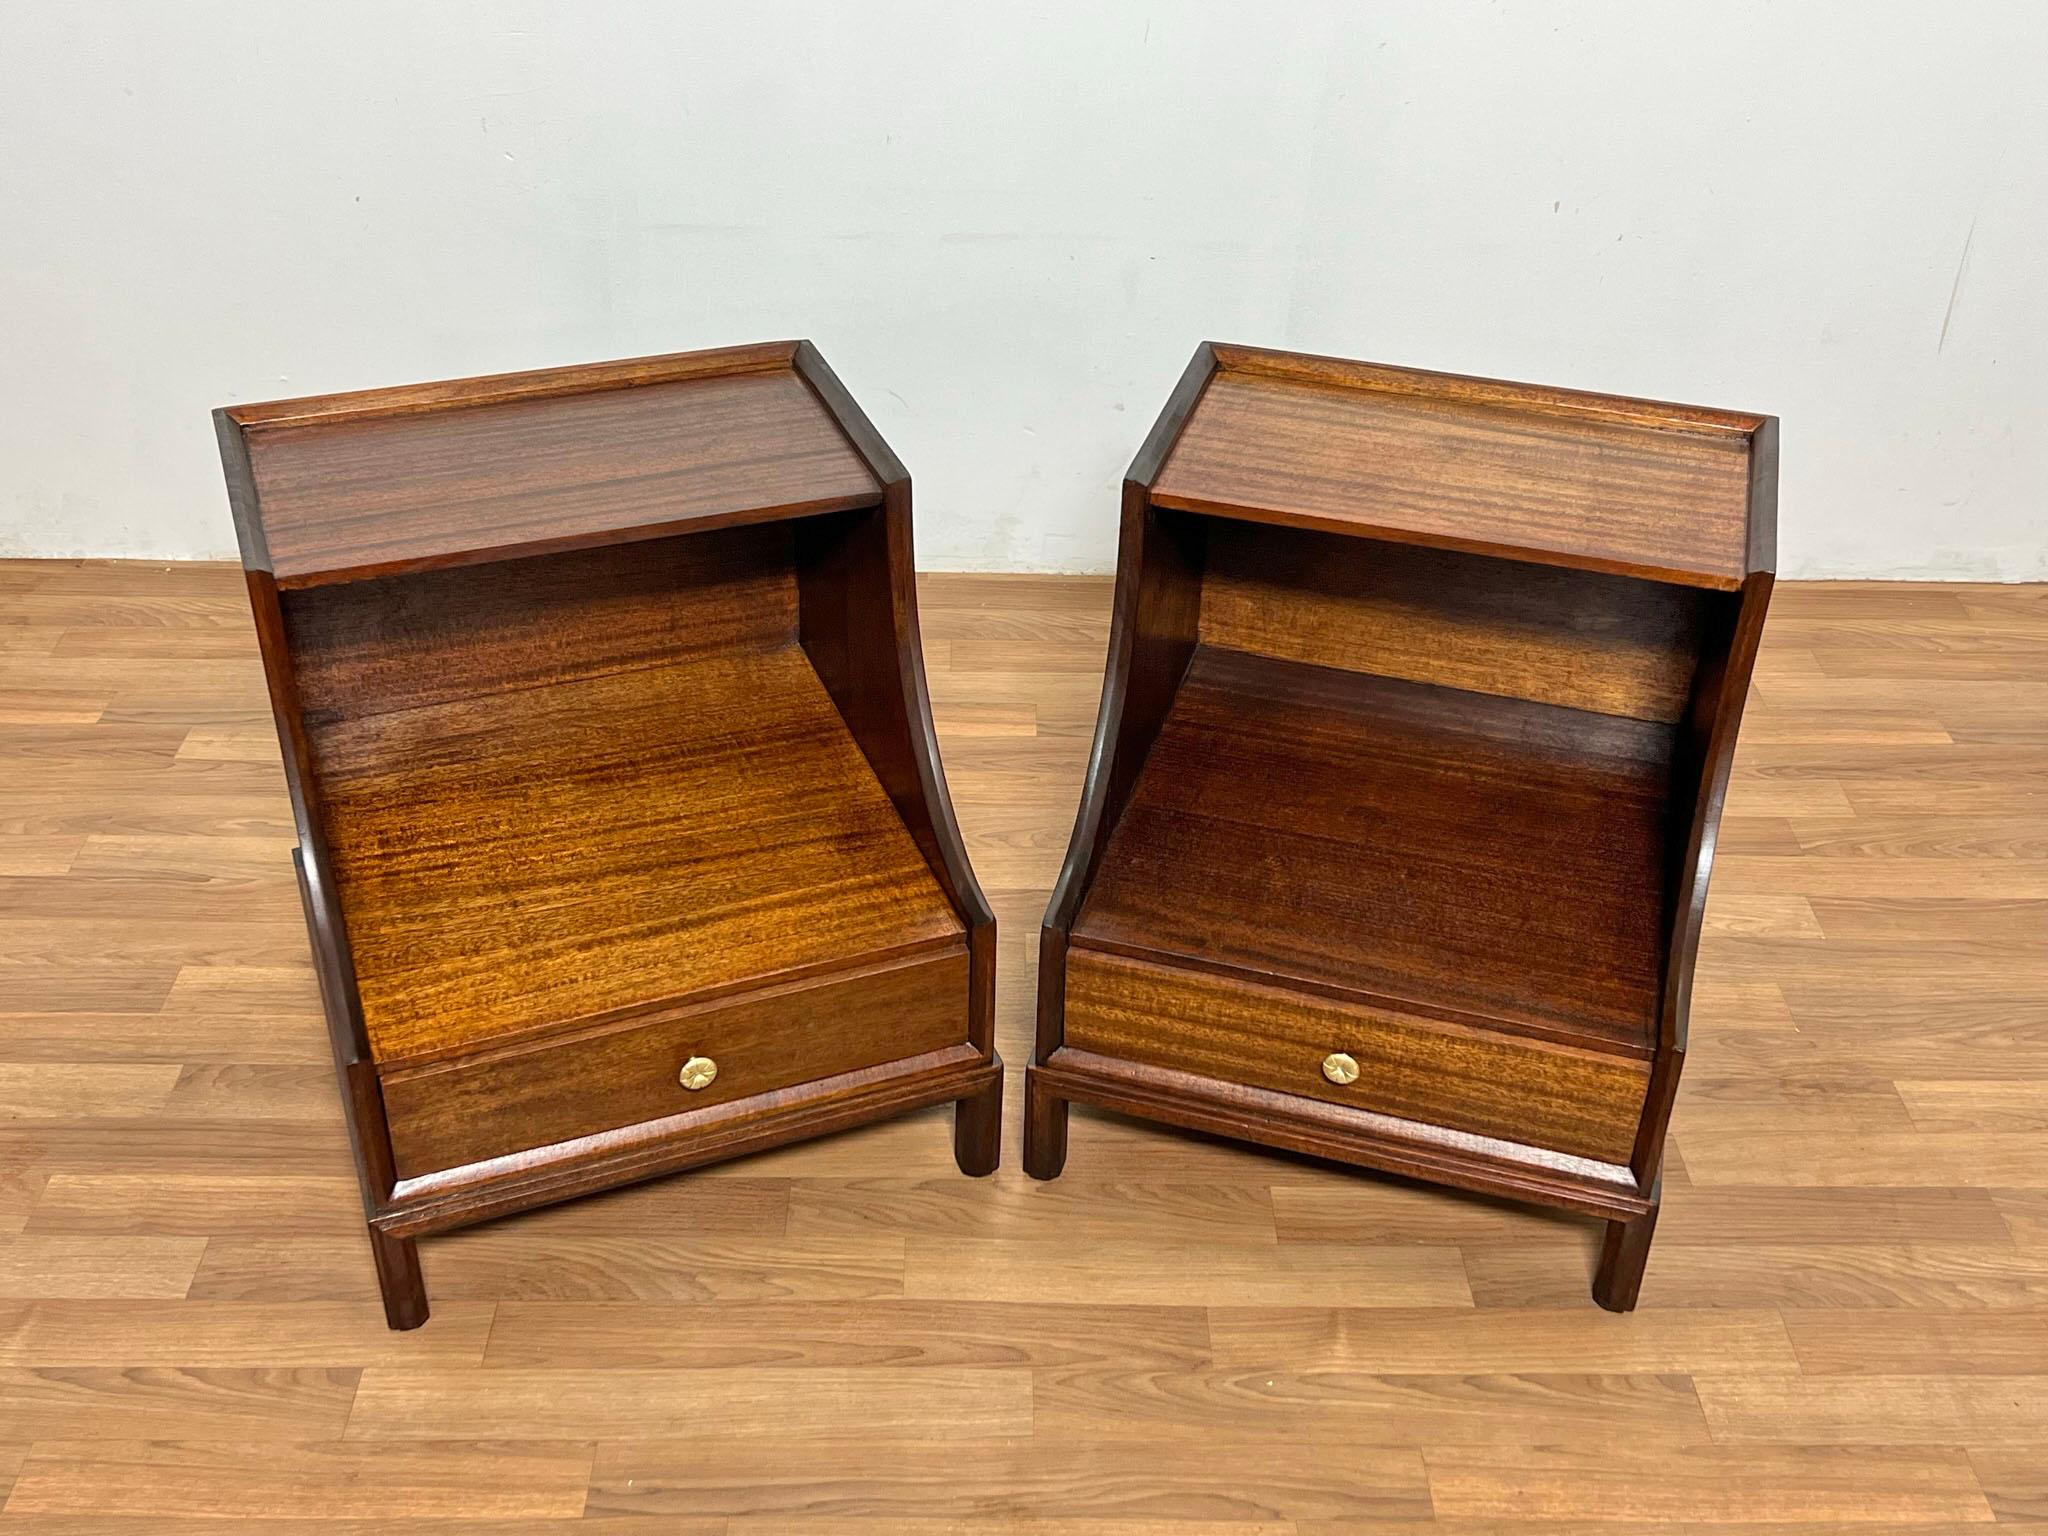 Pair of Tommi Parzinger for Charak Modern Night Stands, circa 1950s For Sale 5